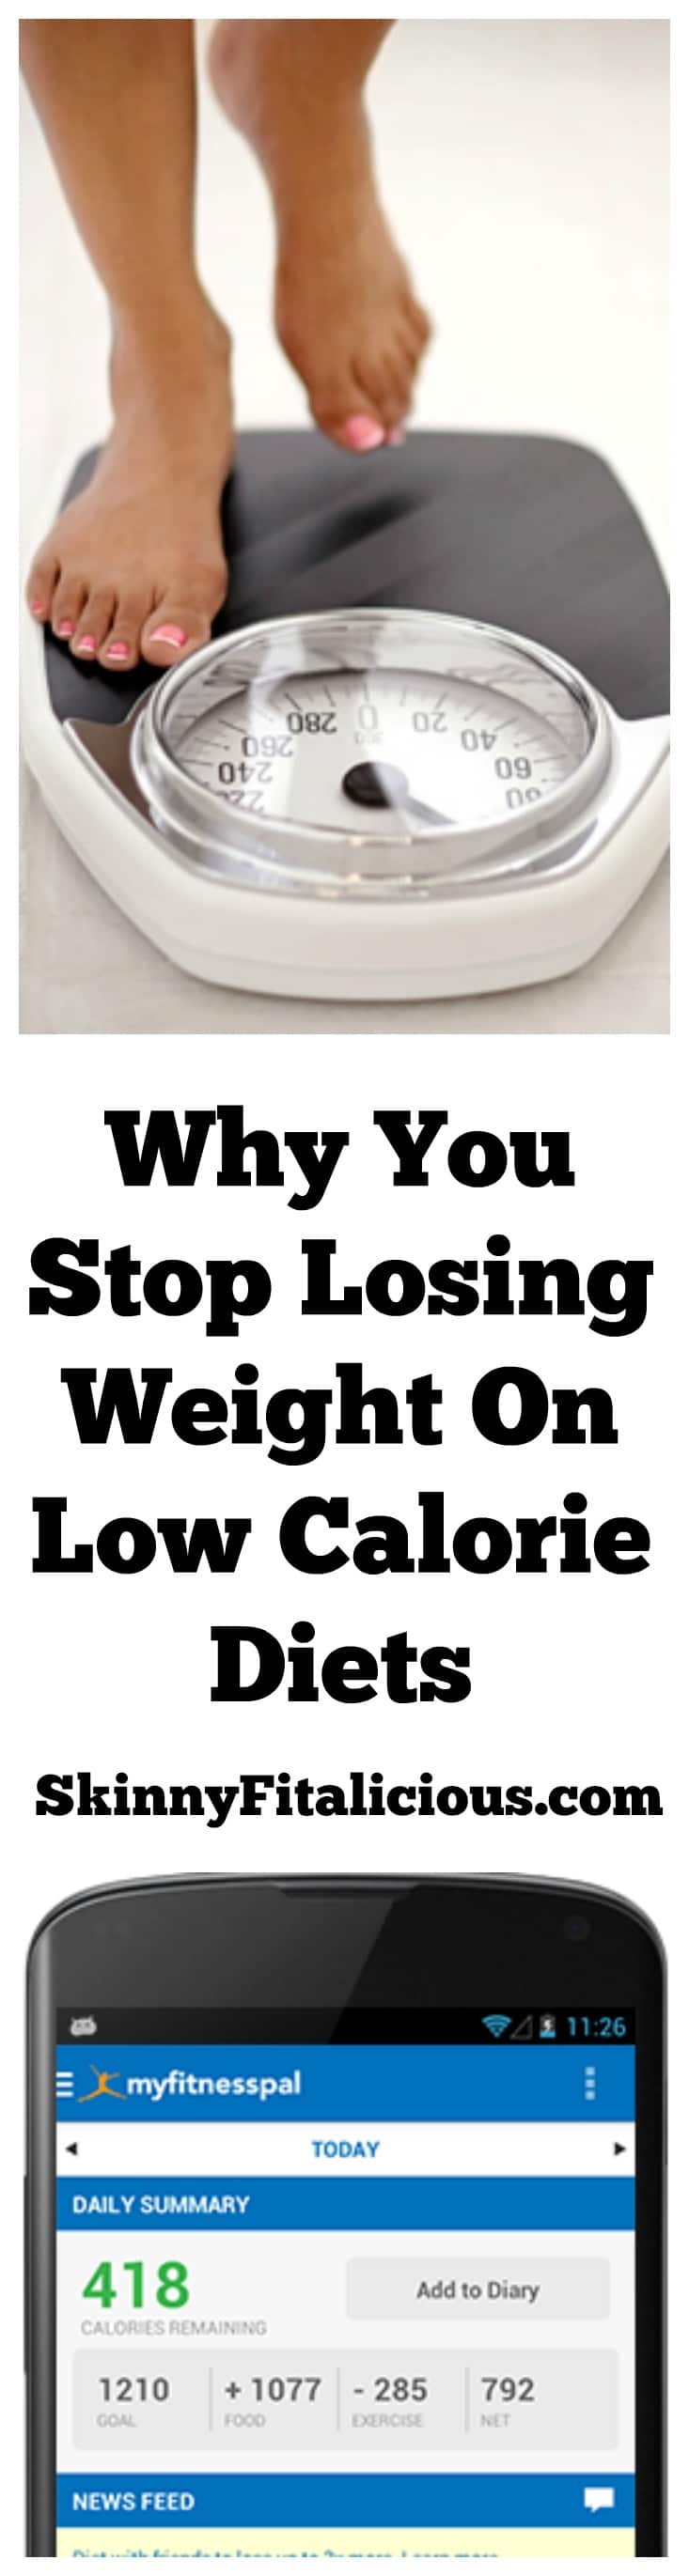 Everything we're told about weight loss is to eat fewer calories to lose weight, but that's not true. Here's Why You Stop Losing Weight On Low Calorie Diets